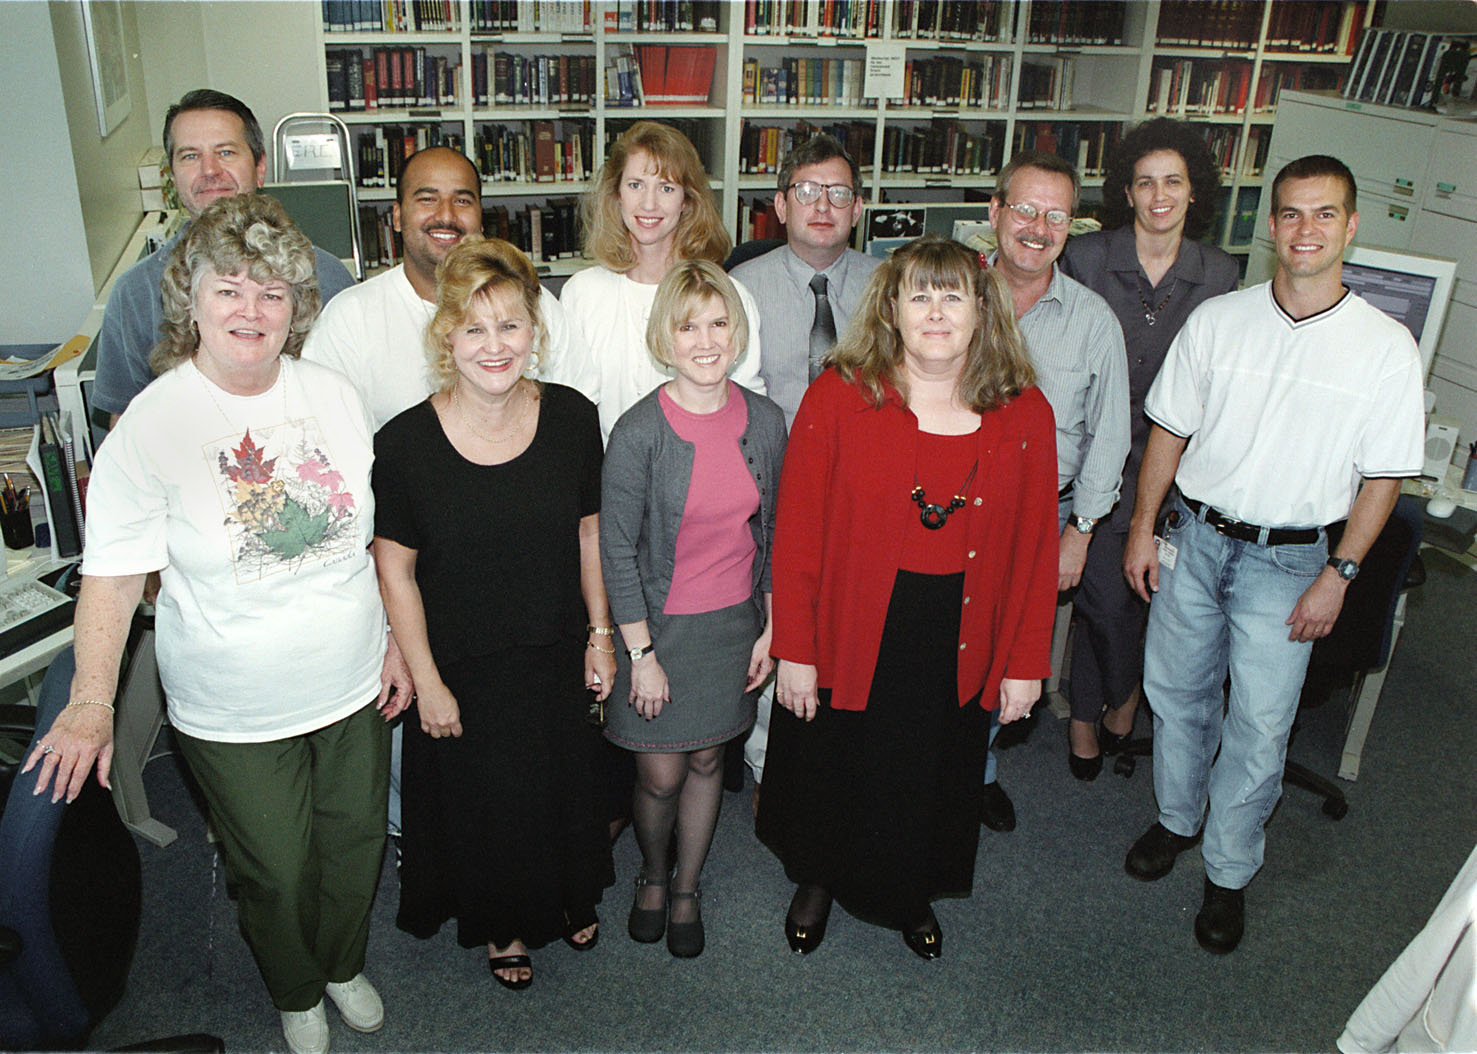 The staff of the Sun-Sentinel pose in the library